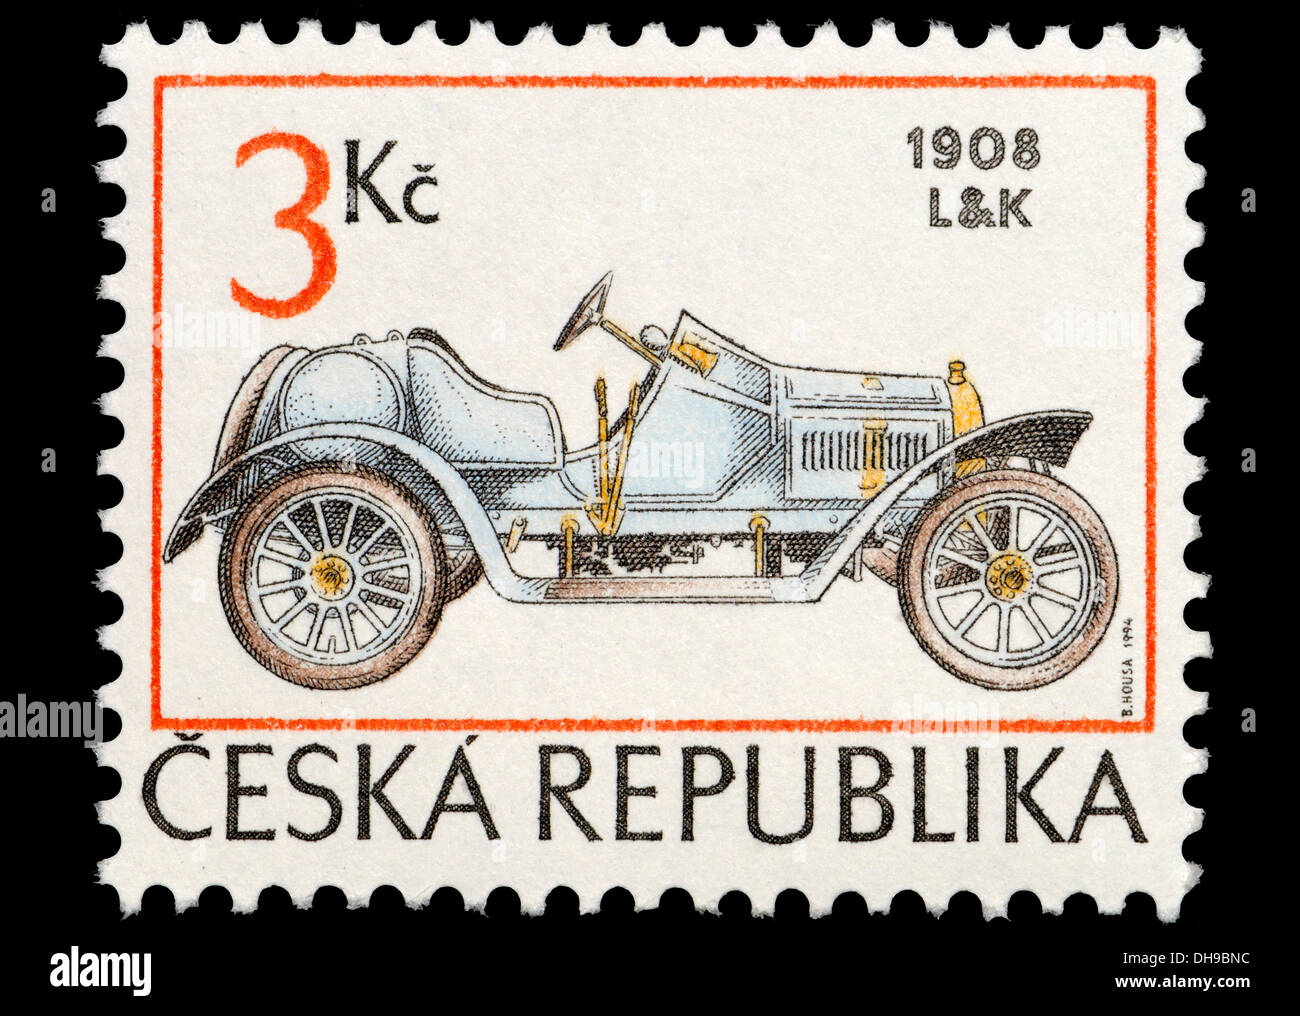 Czech Republic postage stamp: Laurin & Klement (later Škoda) model BS, 1908 Stock Photo